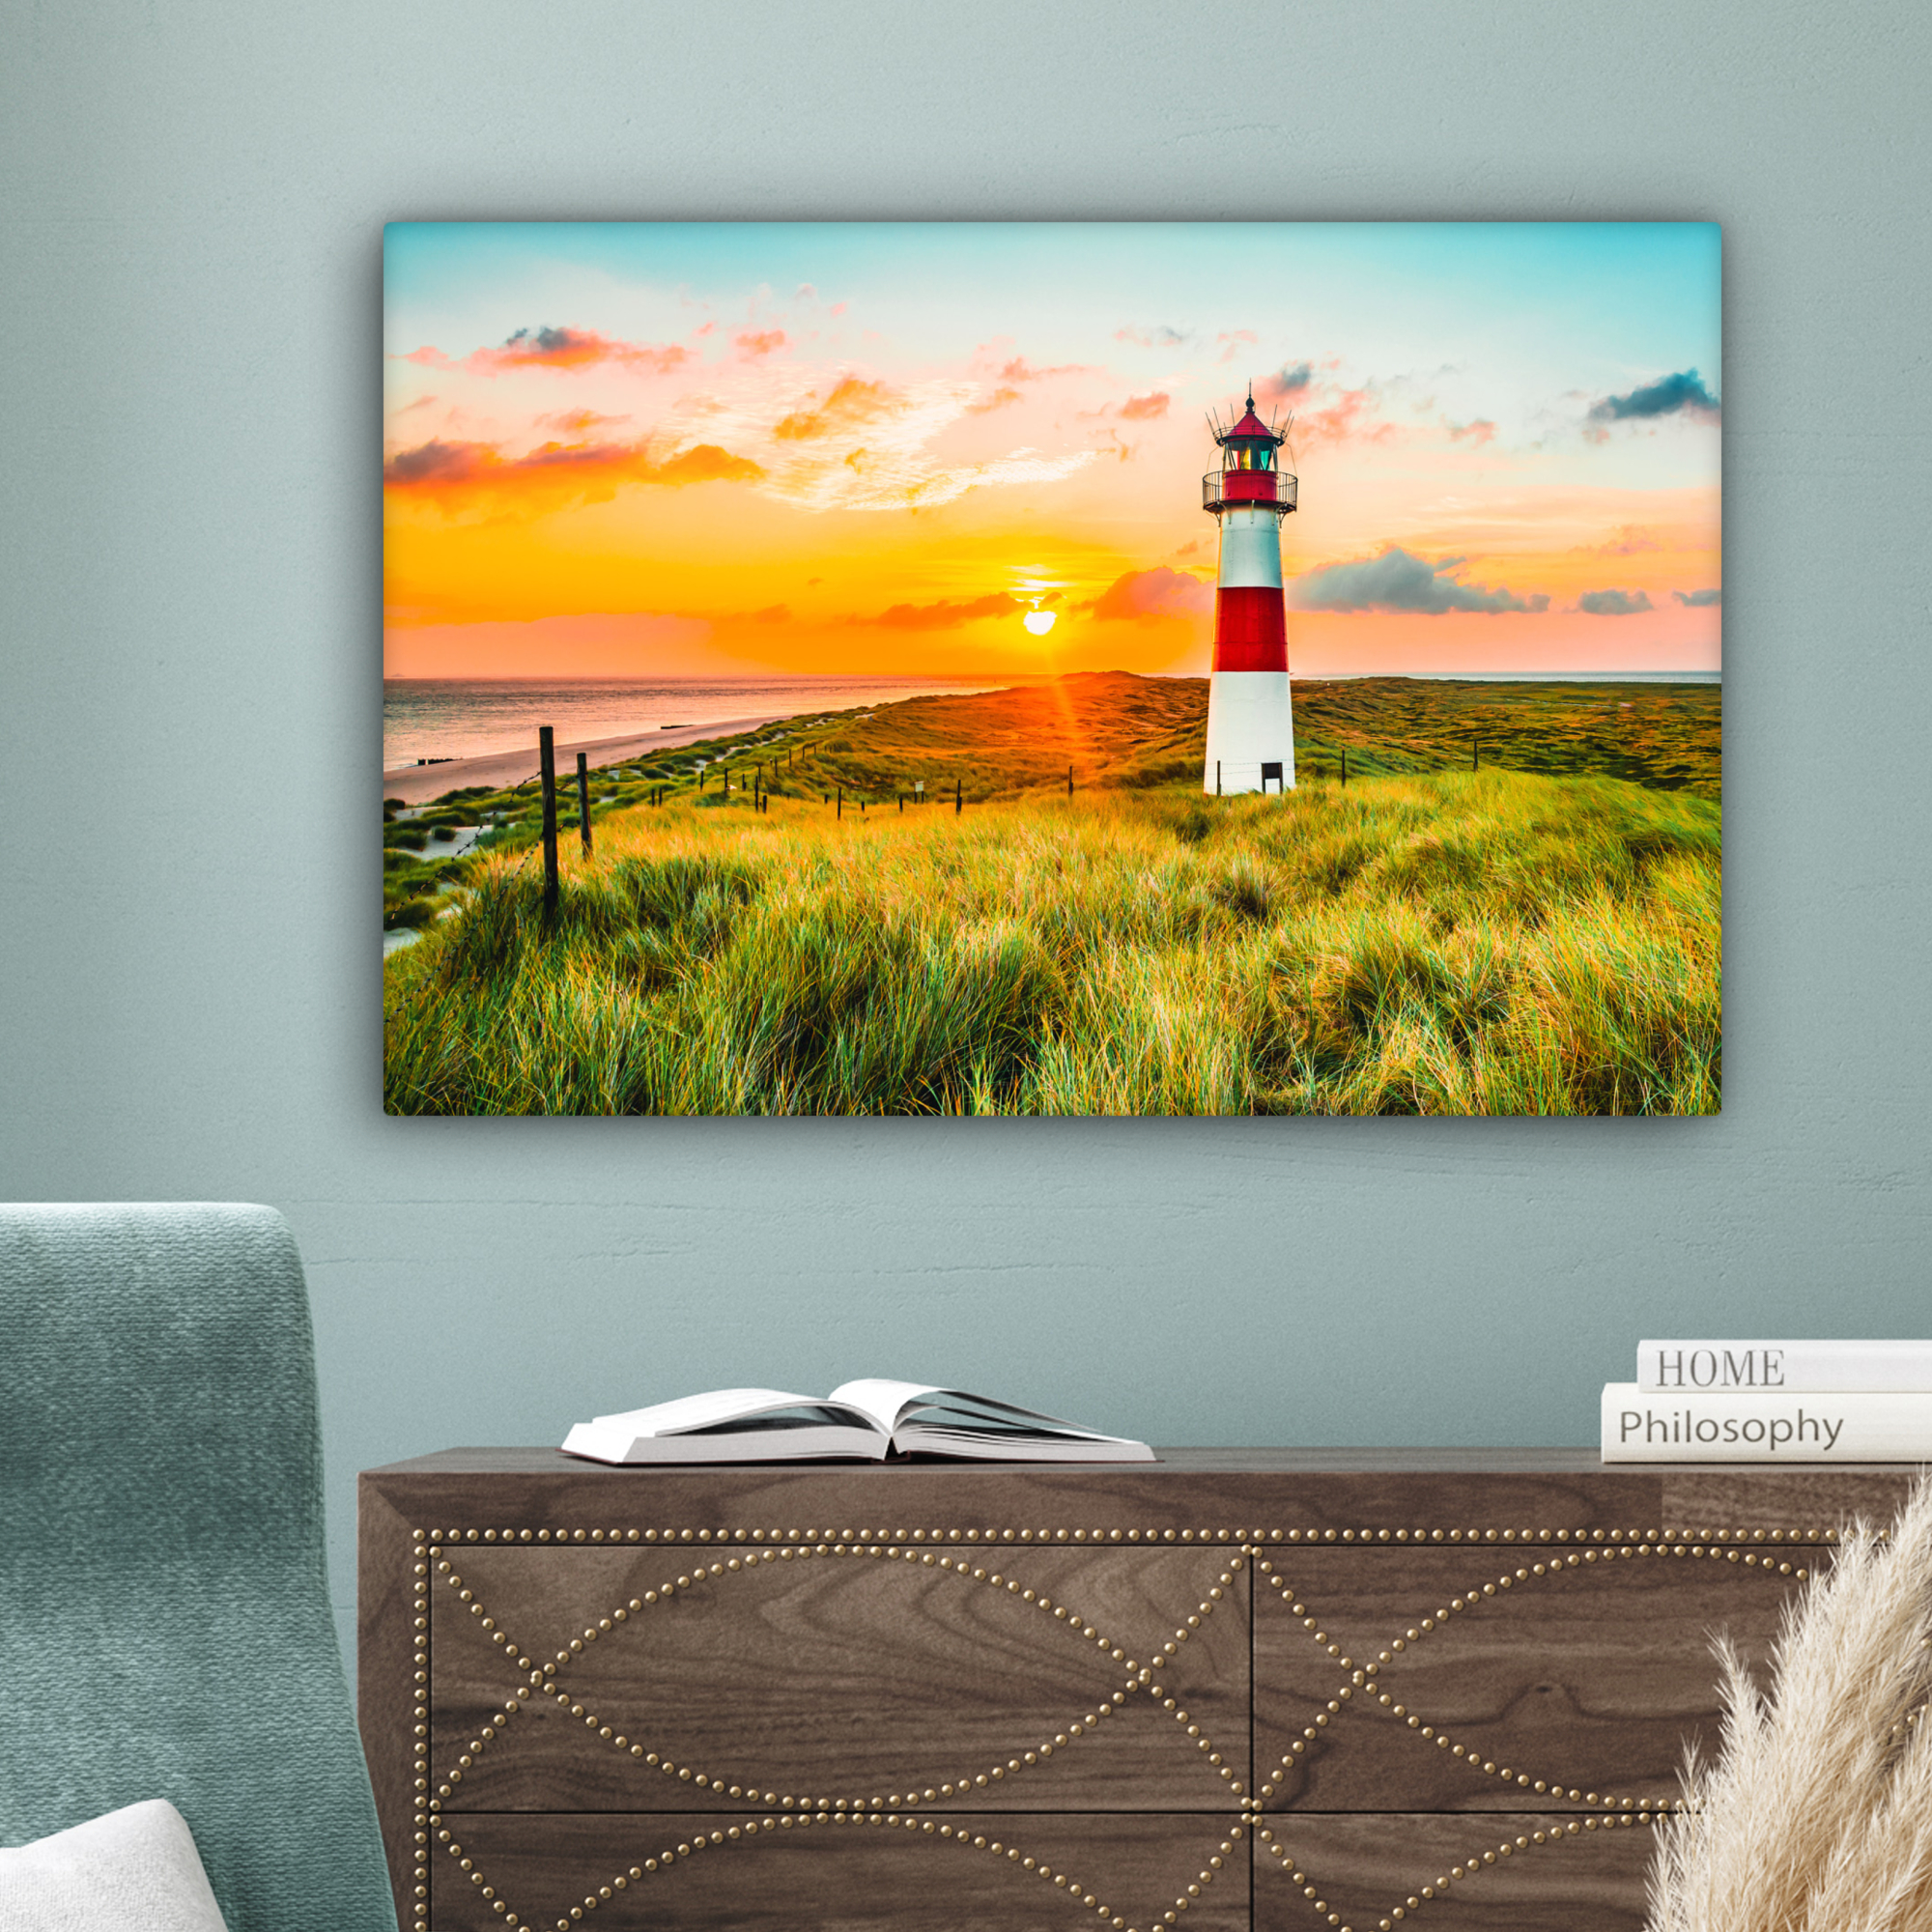 Tableau sur toile - Phare - Nature - Soleil - Paysage - Herbe - Plage - Mer-4